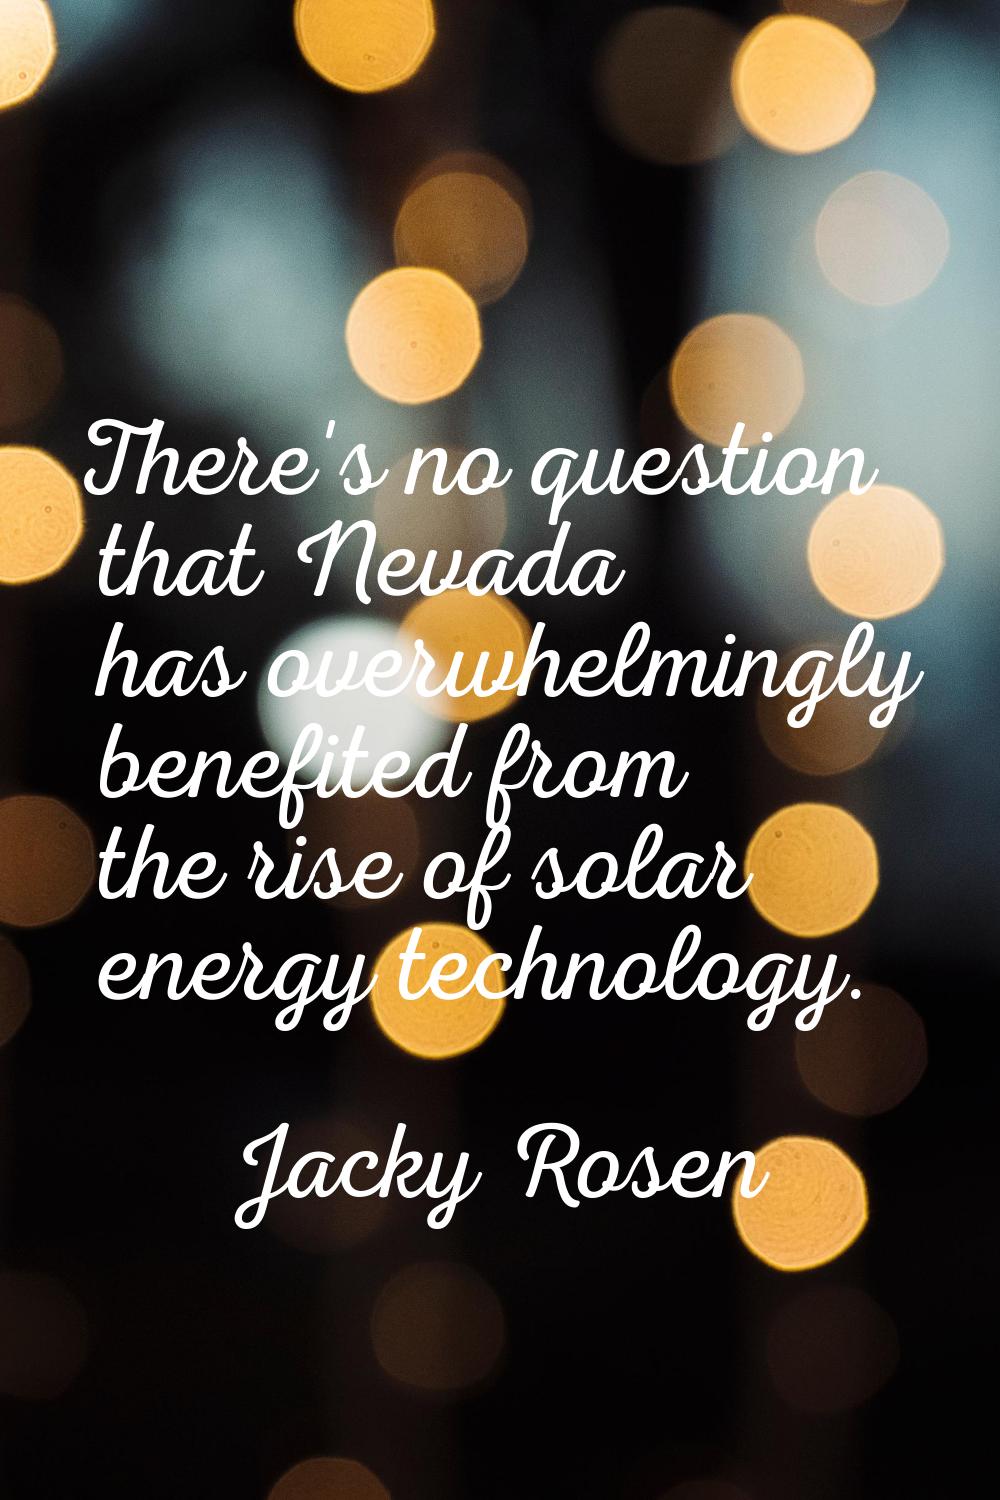 There's no question that Nevada has overwhelmingly benefited from the rise of solar energy technolo